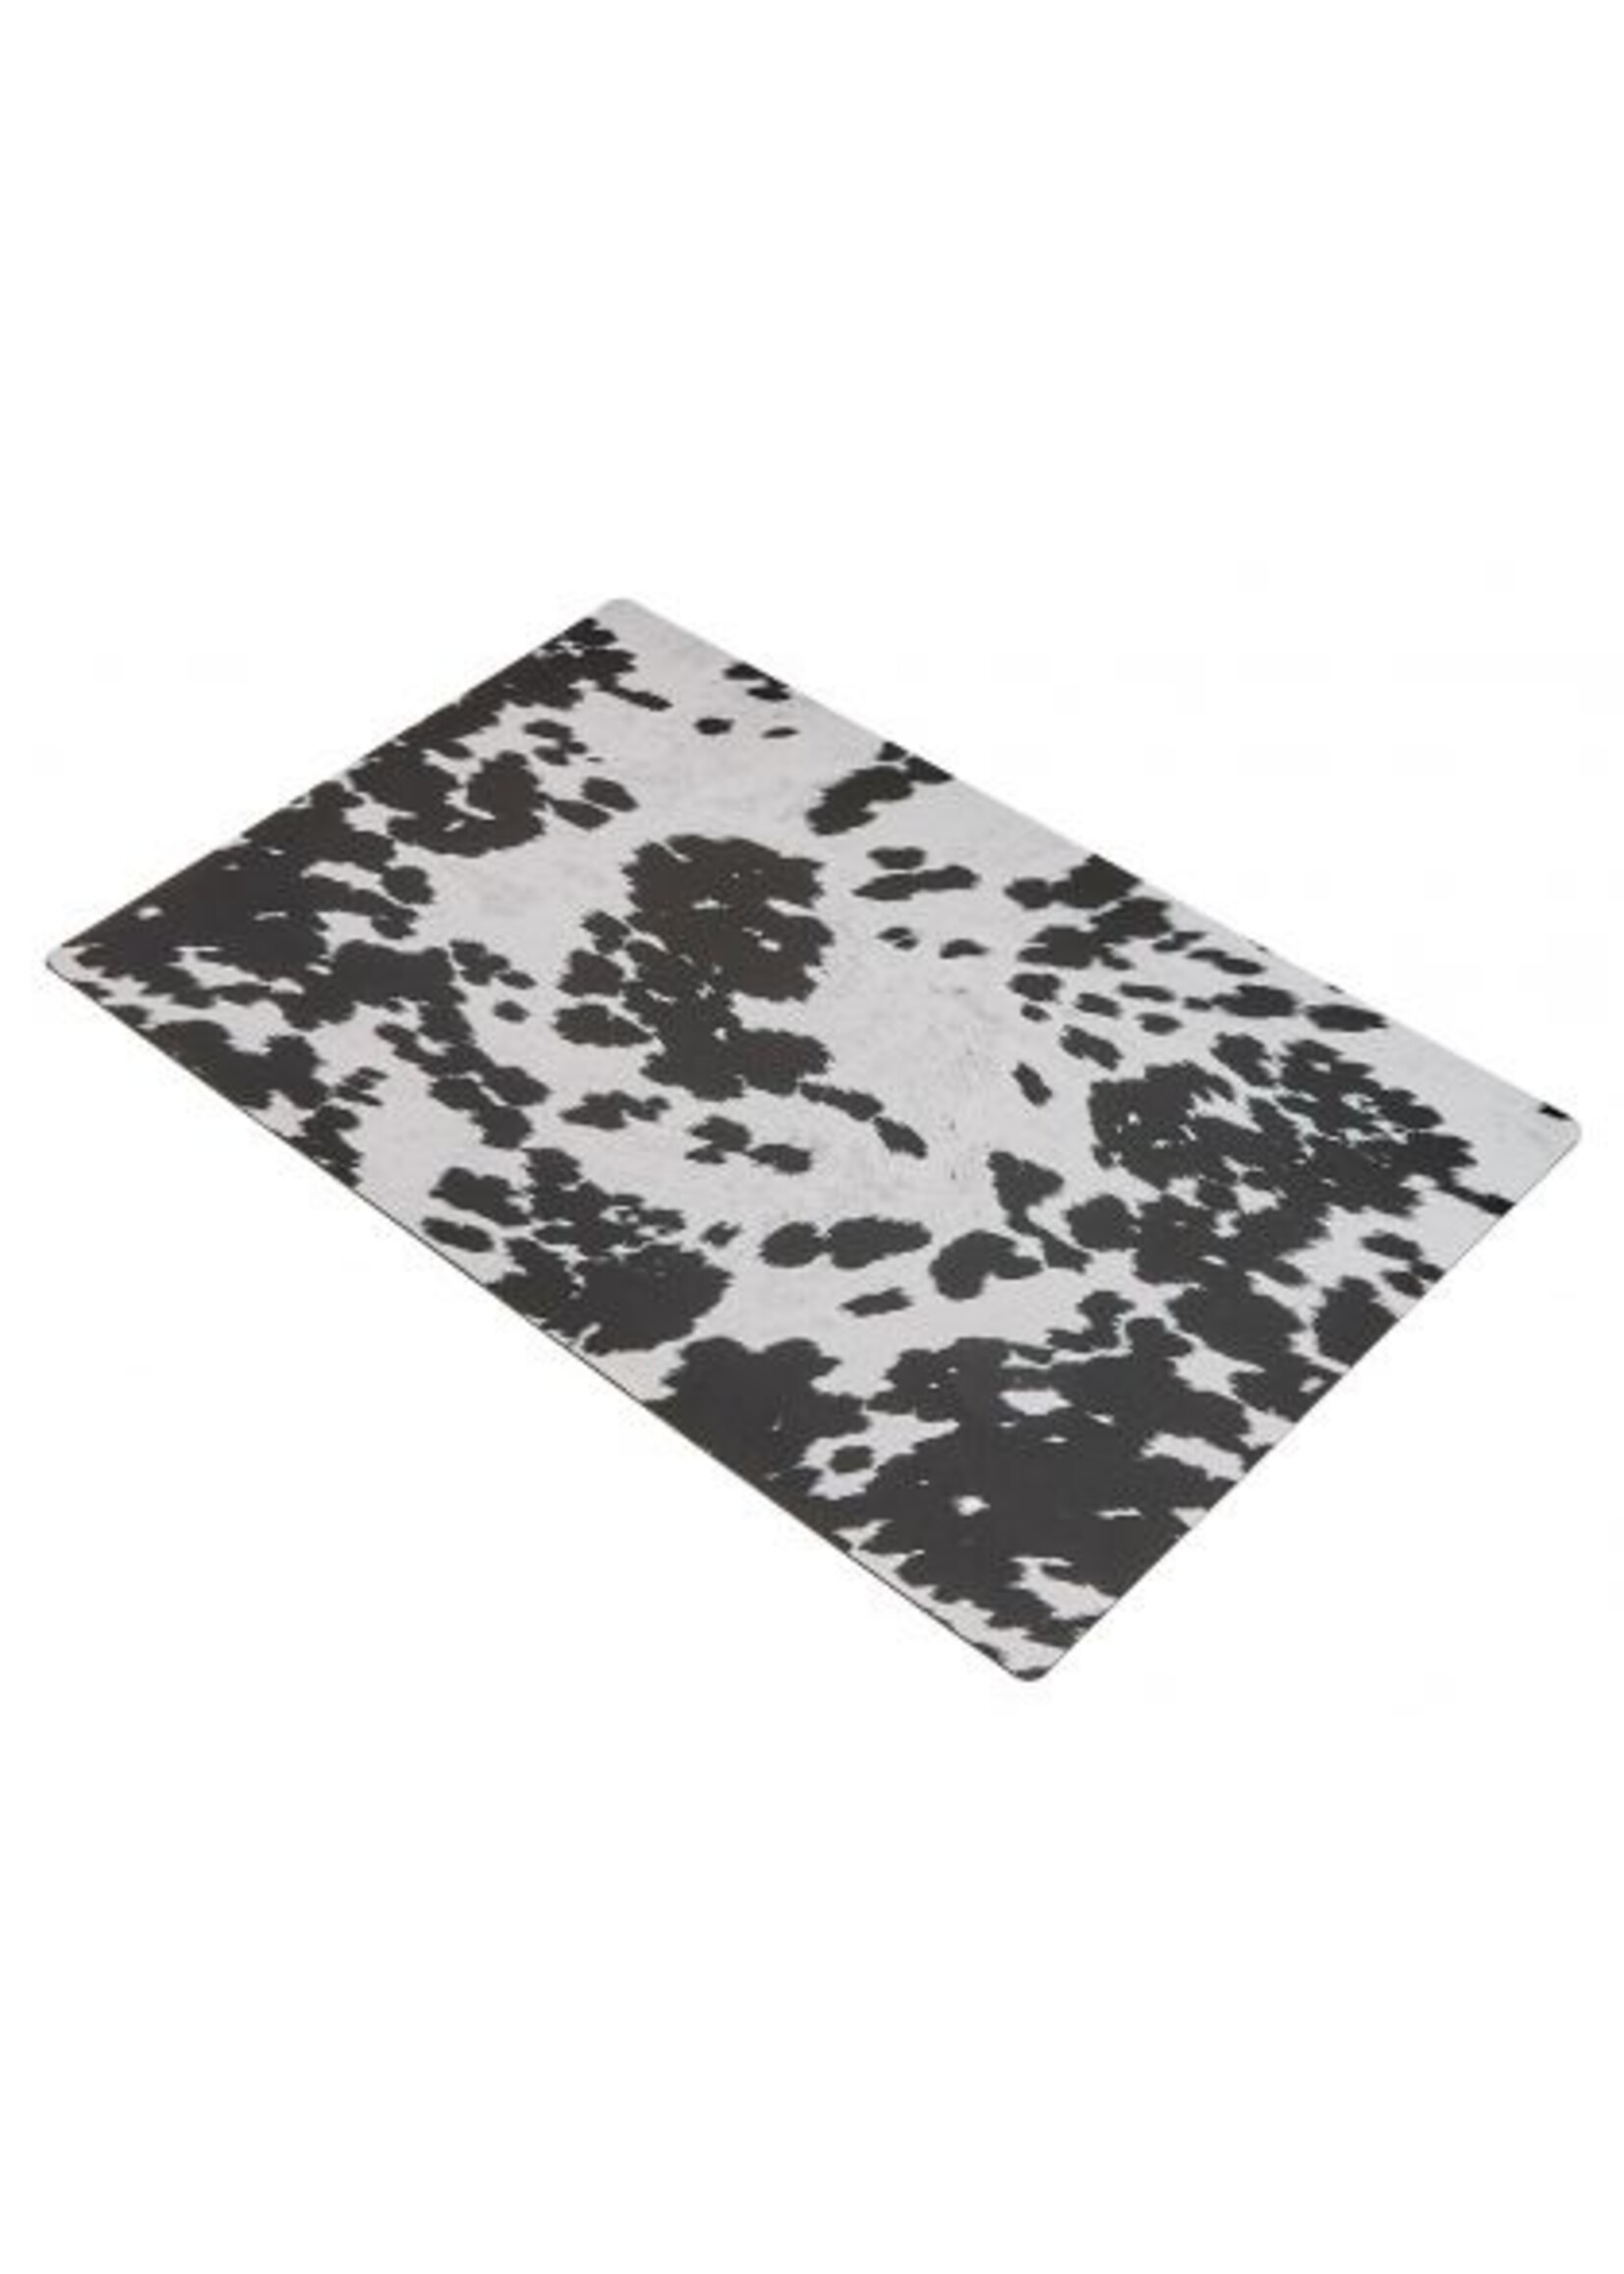 Bowsers Pet Products Bowsers Sit & Stay Mat